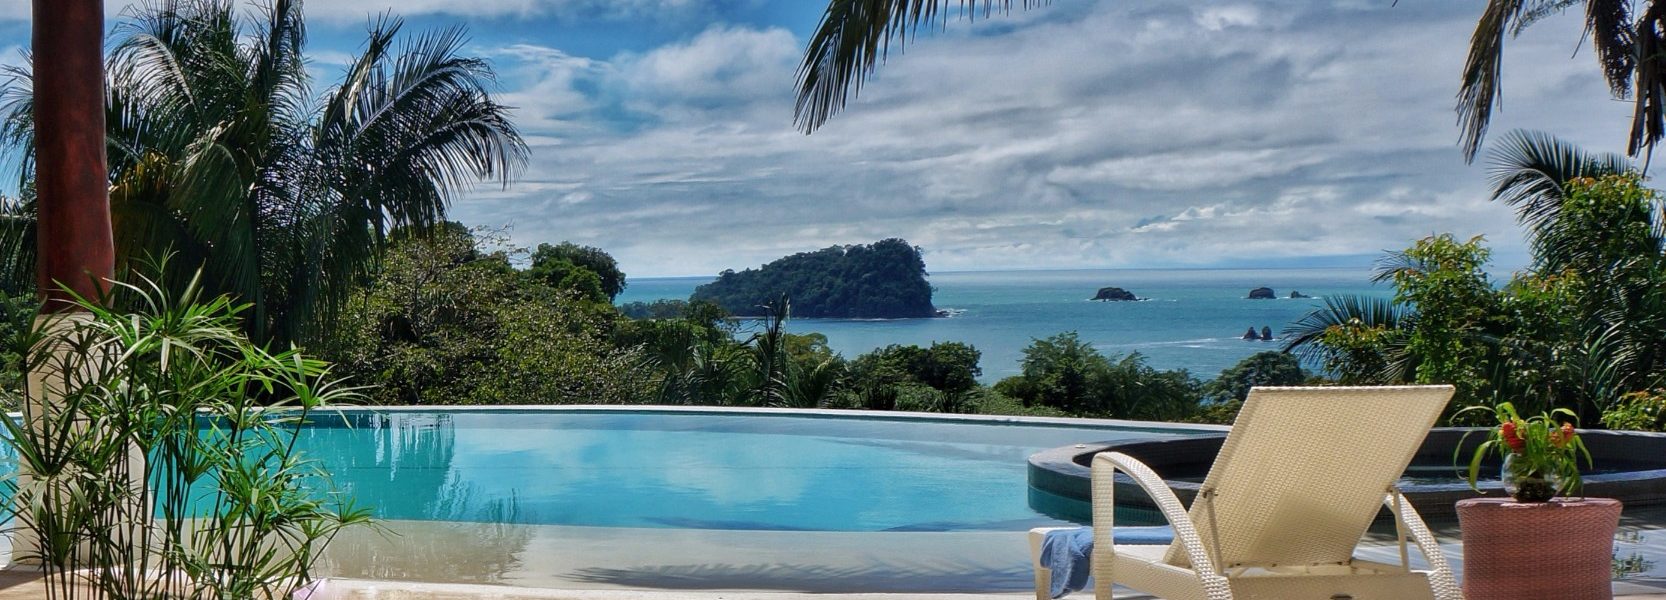 Imagine this incredible view of the Pacific from the pool at this stunning property, sipping a cup of coffee in the morning or a cold drink in the afternoon. Manuel Antonio National Park is visible in the distance. 